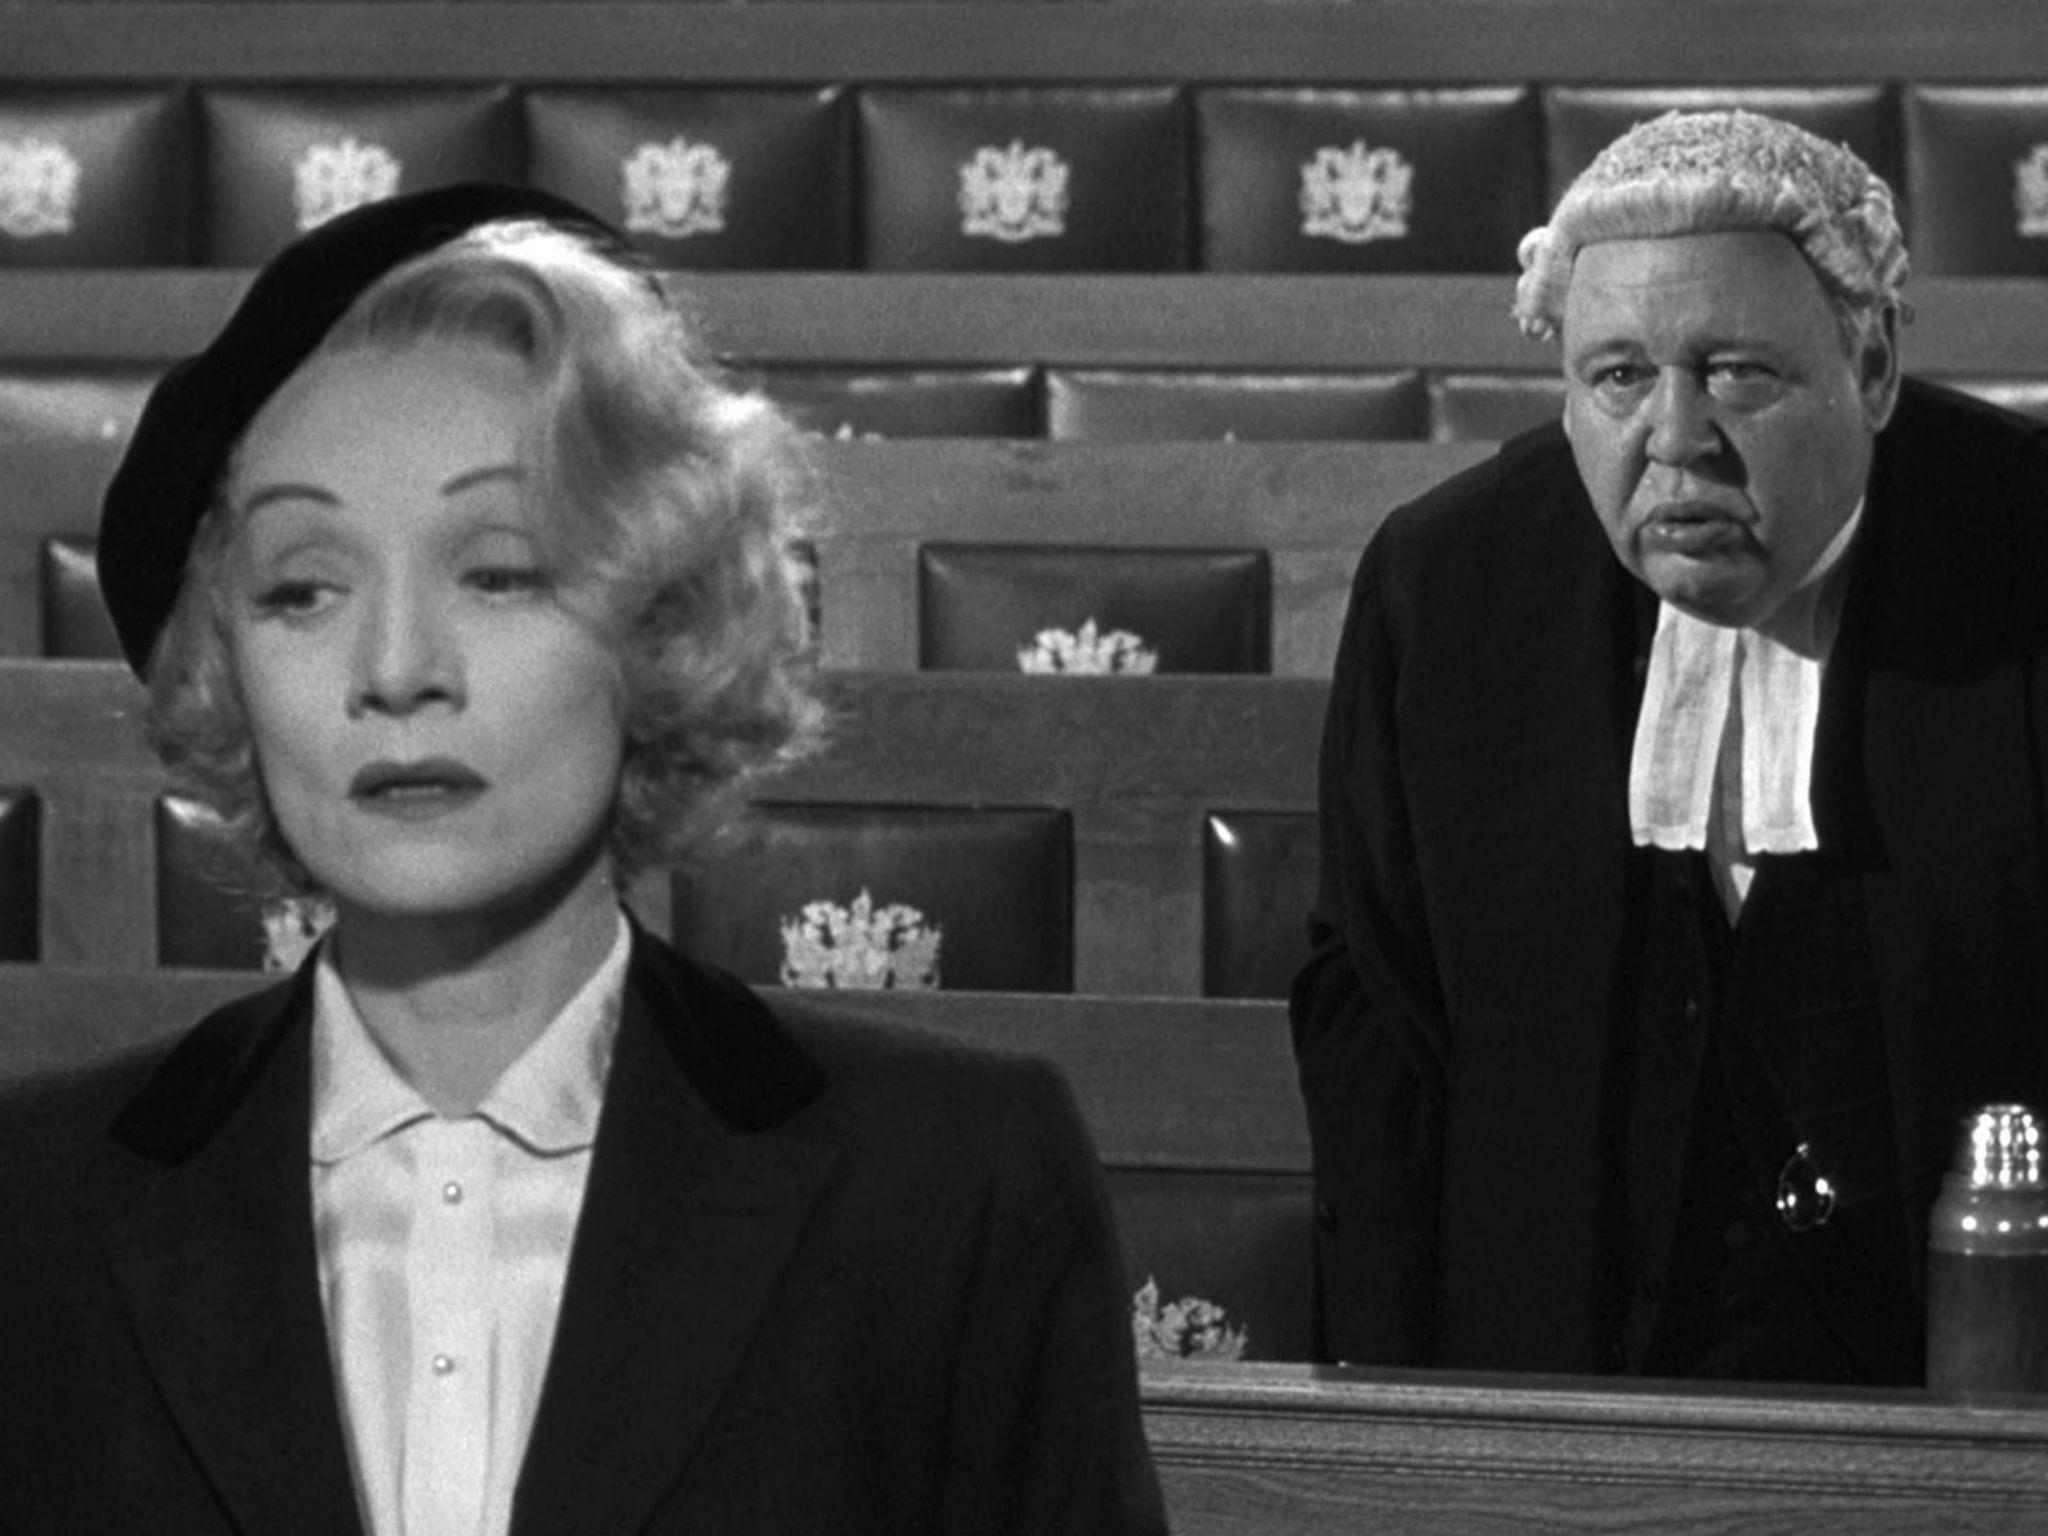 Marlene Dietrich and Charles Laughton in Billy Wilder’s ‘Witness for the Prosecution’